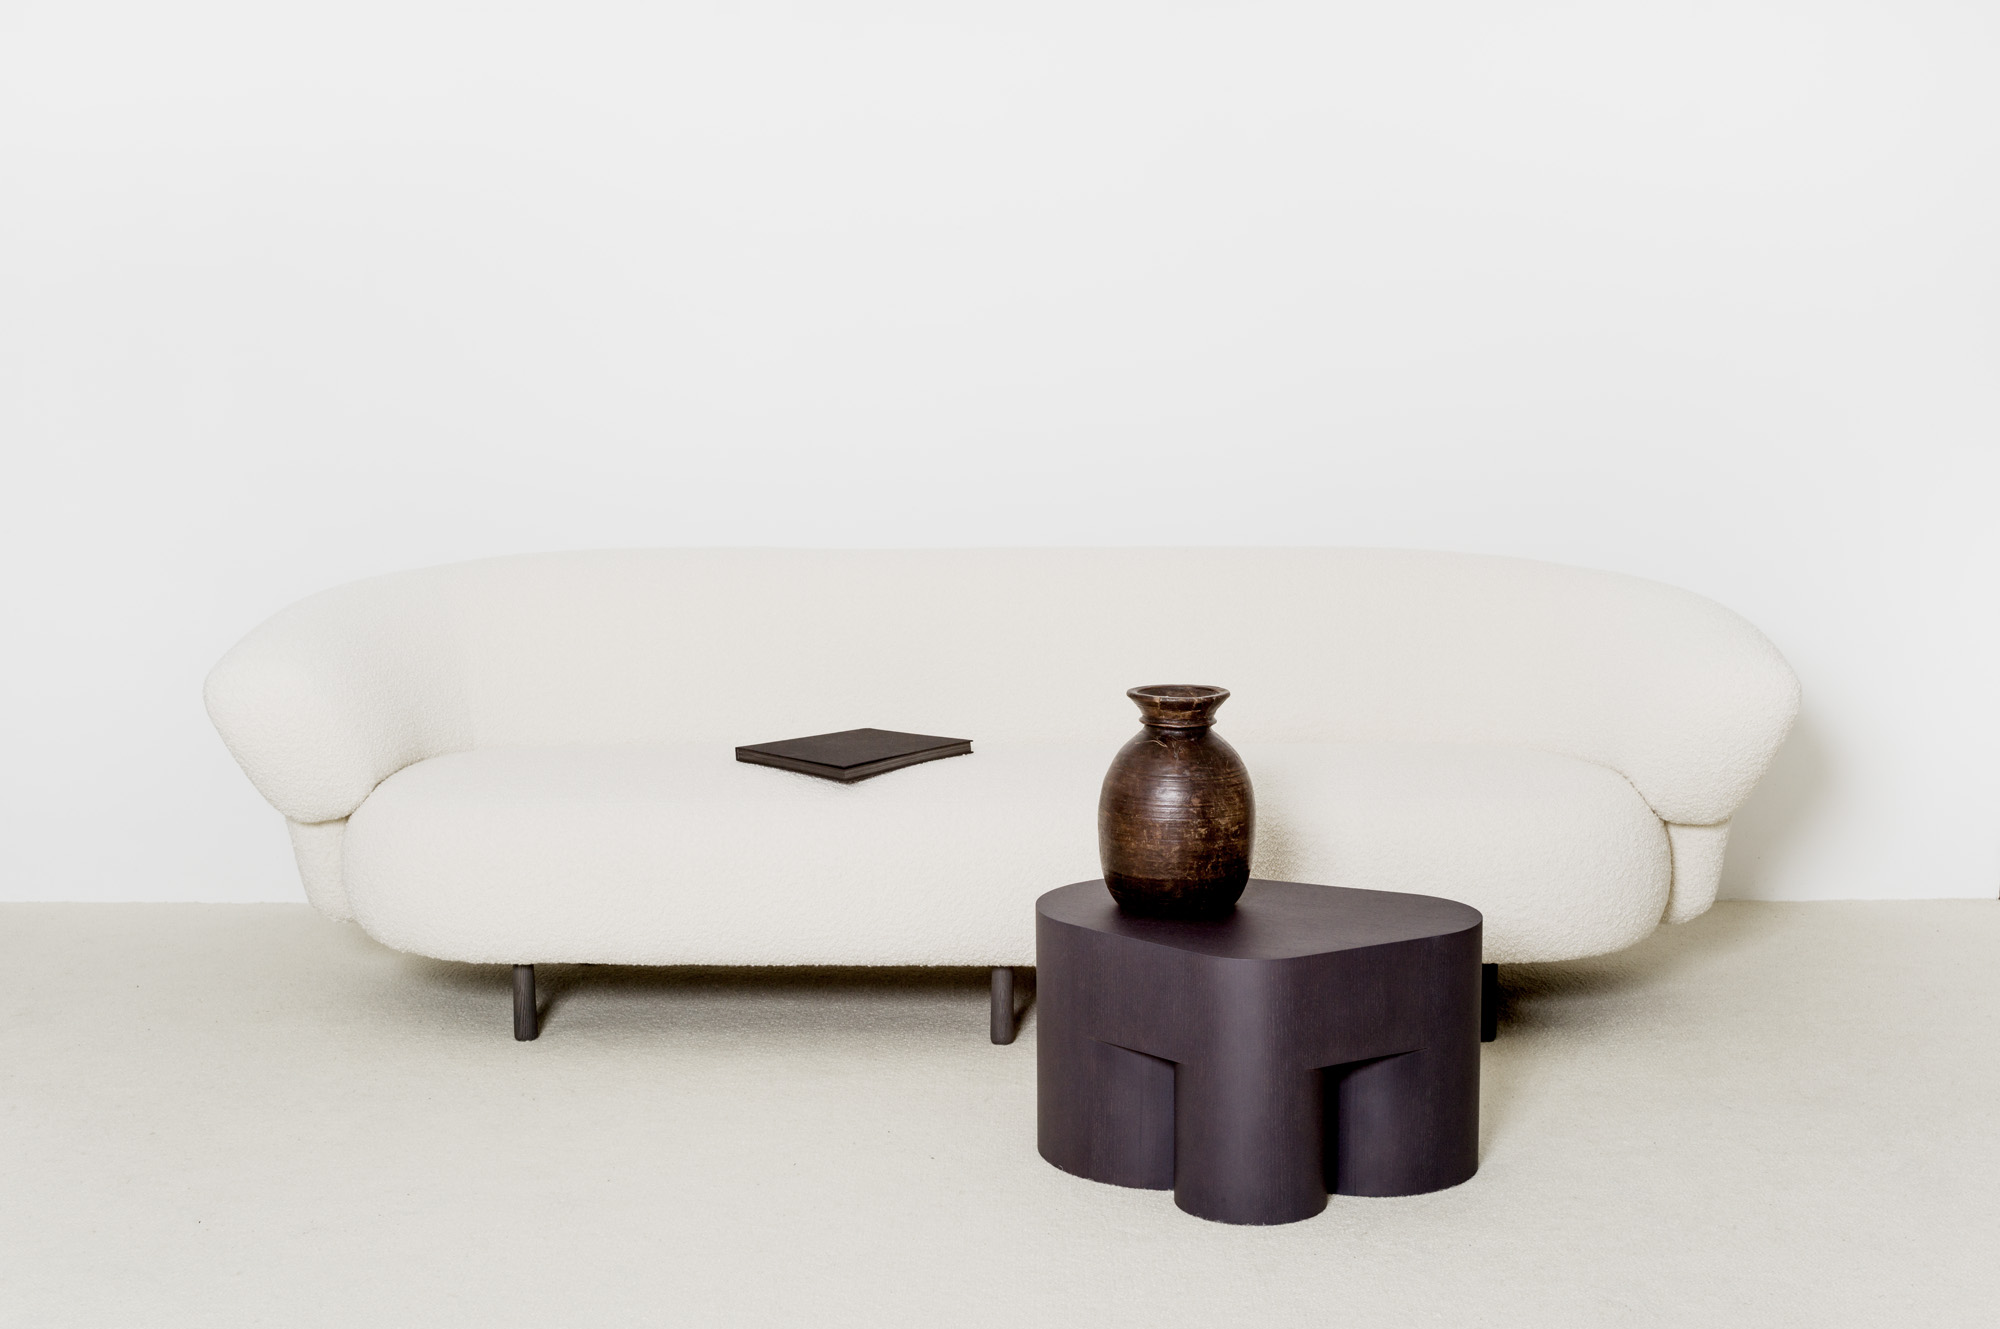 The Ana sofa and Doo low table. Courtesy of Christophe Delcourt.